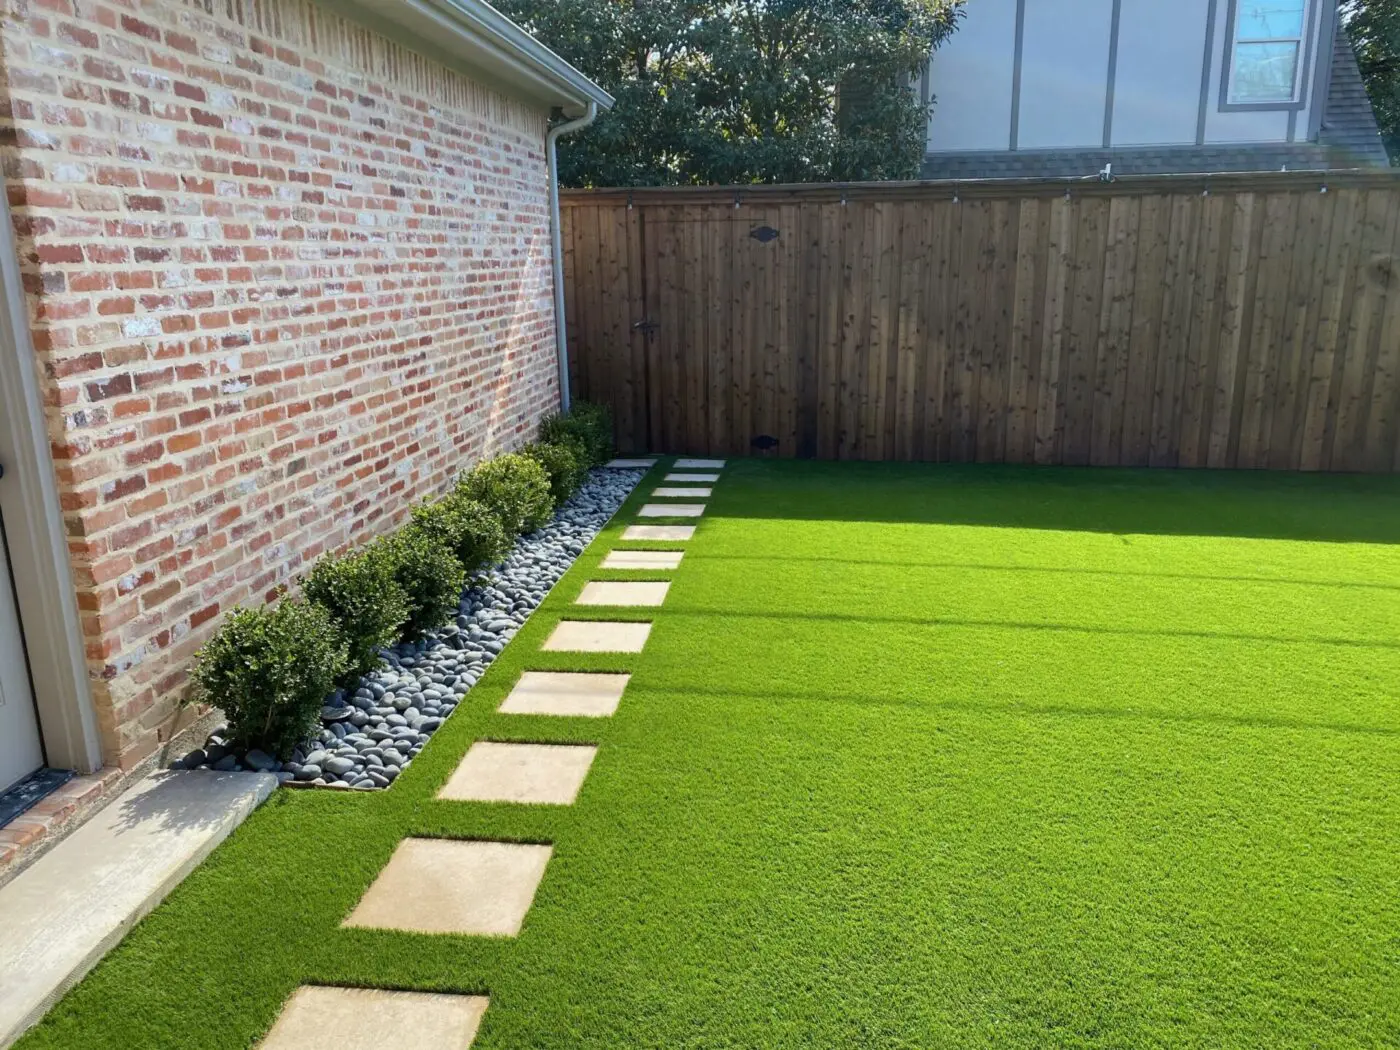 A well-maintained backyard featuring a brick wall on the left, a wooden fence in the background, and lush green pet turf. A row of small shrubs with a bed of white and gray pebbles runs alongside the wall. Square stepping stones create a path through the grass.